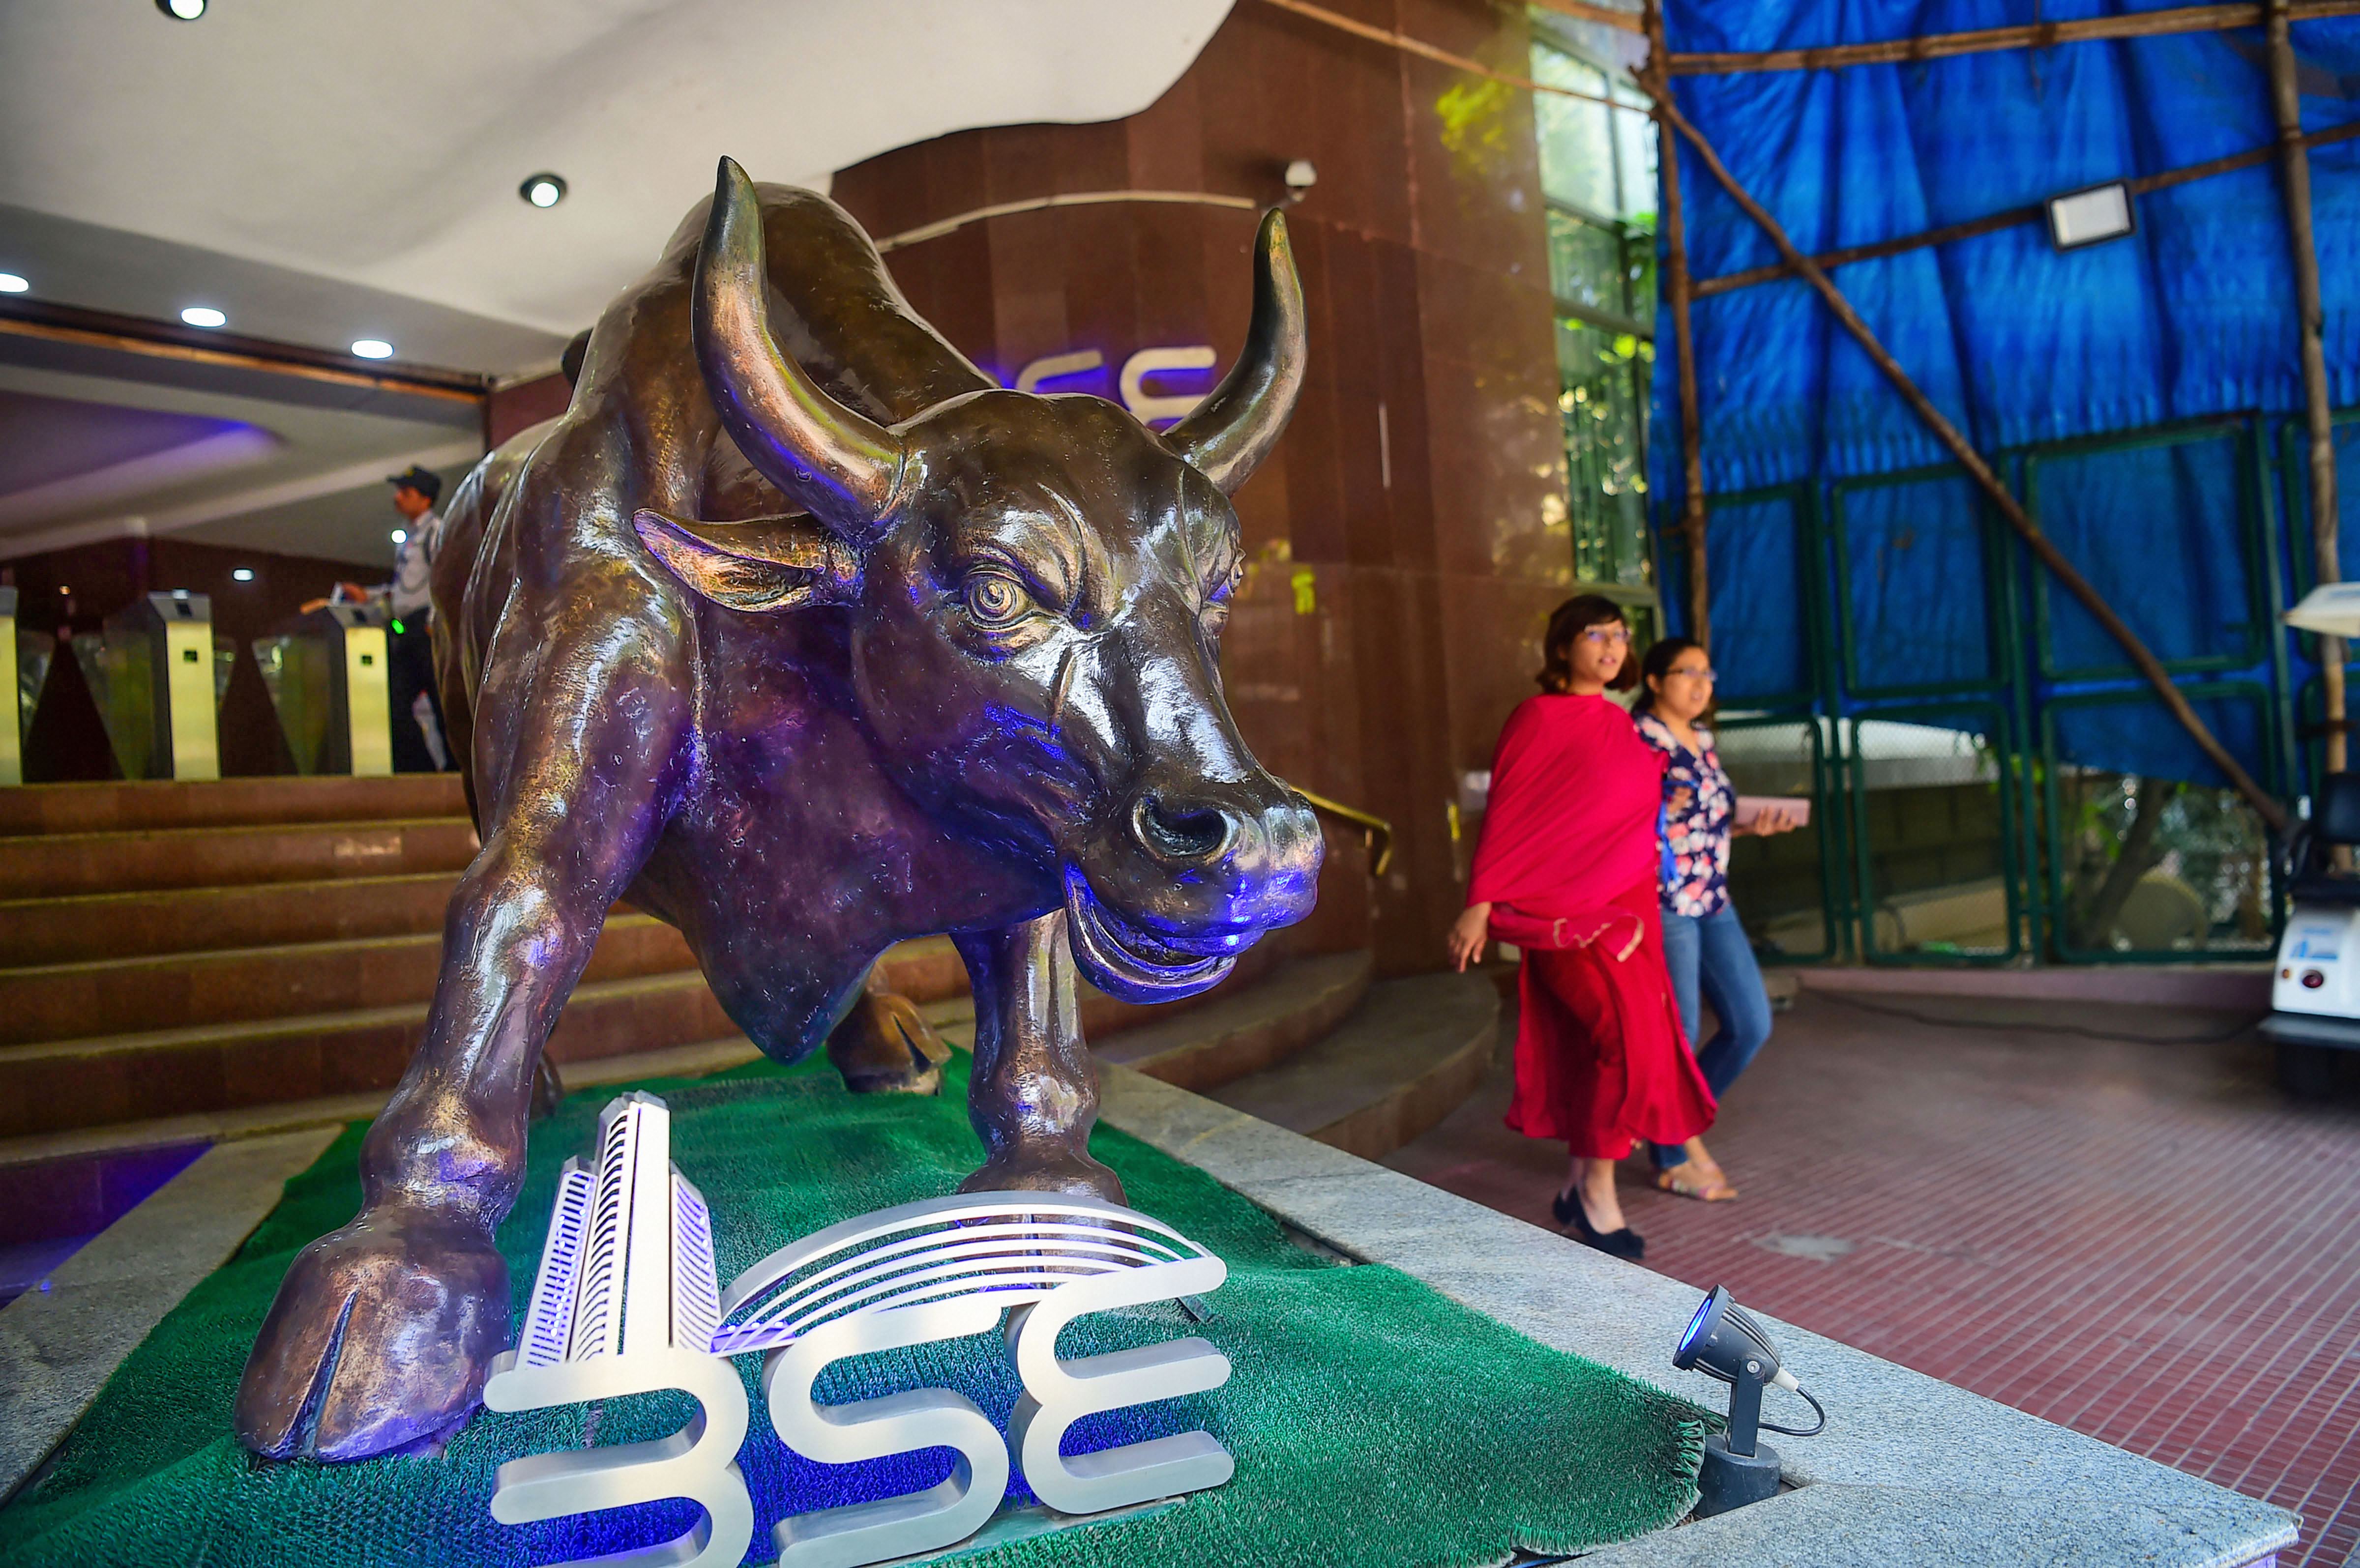 Sensex, Nifty gain for 2nd day amid firm global trends; close up nearly 1 per cent